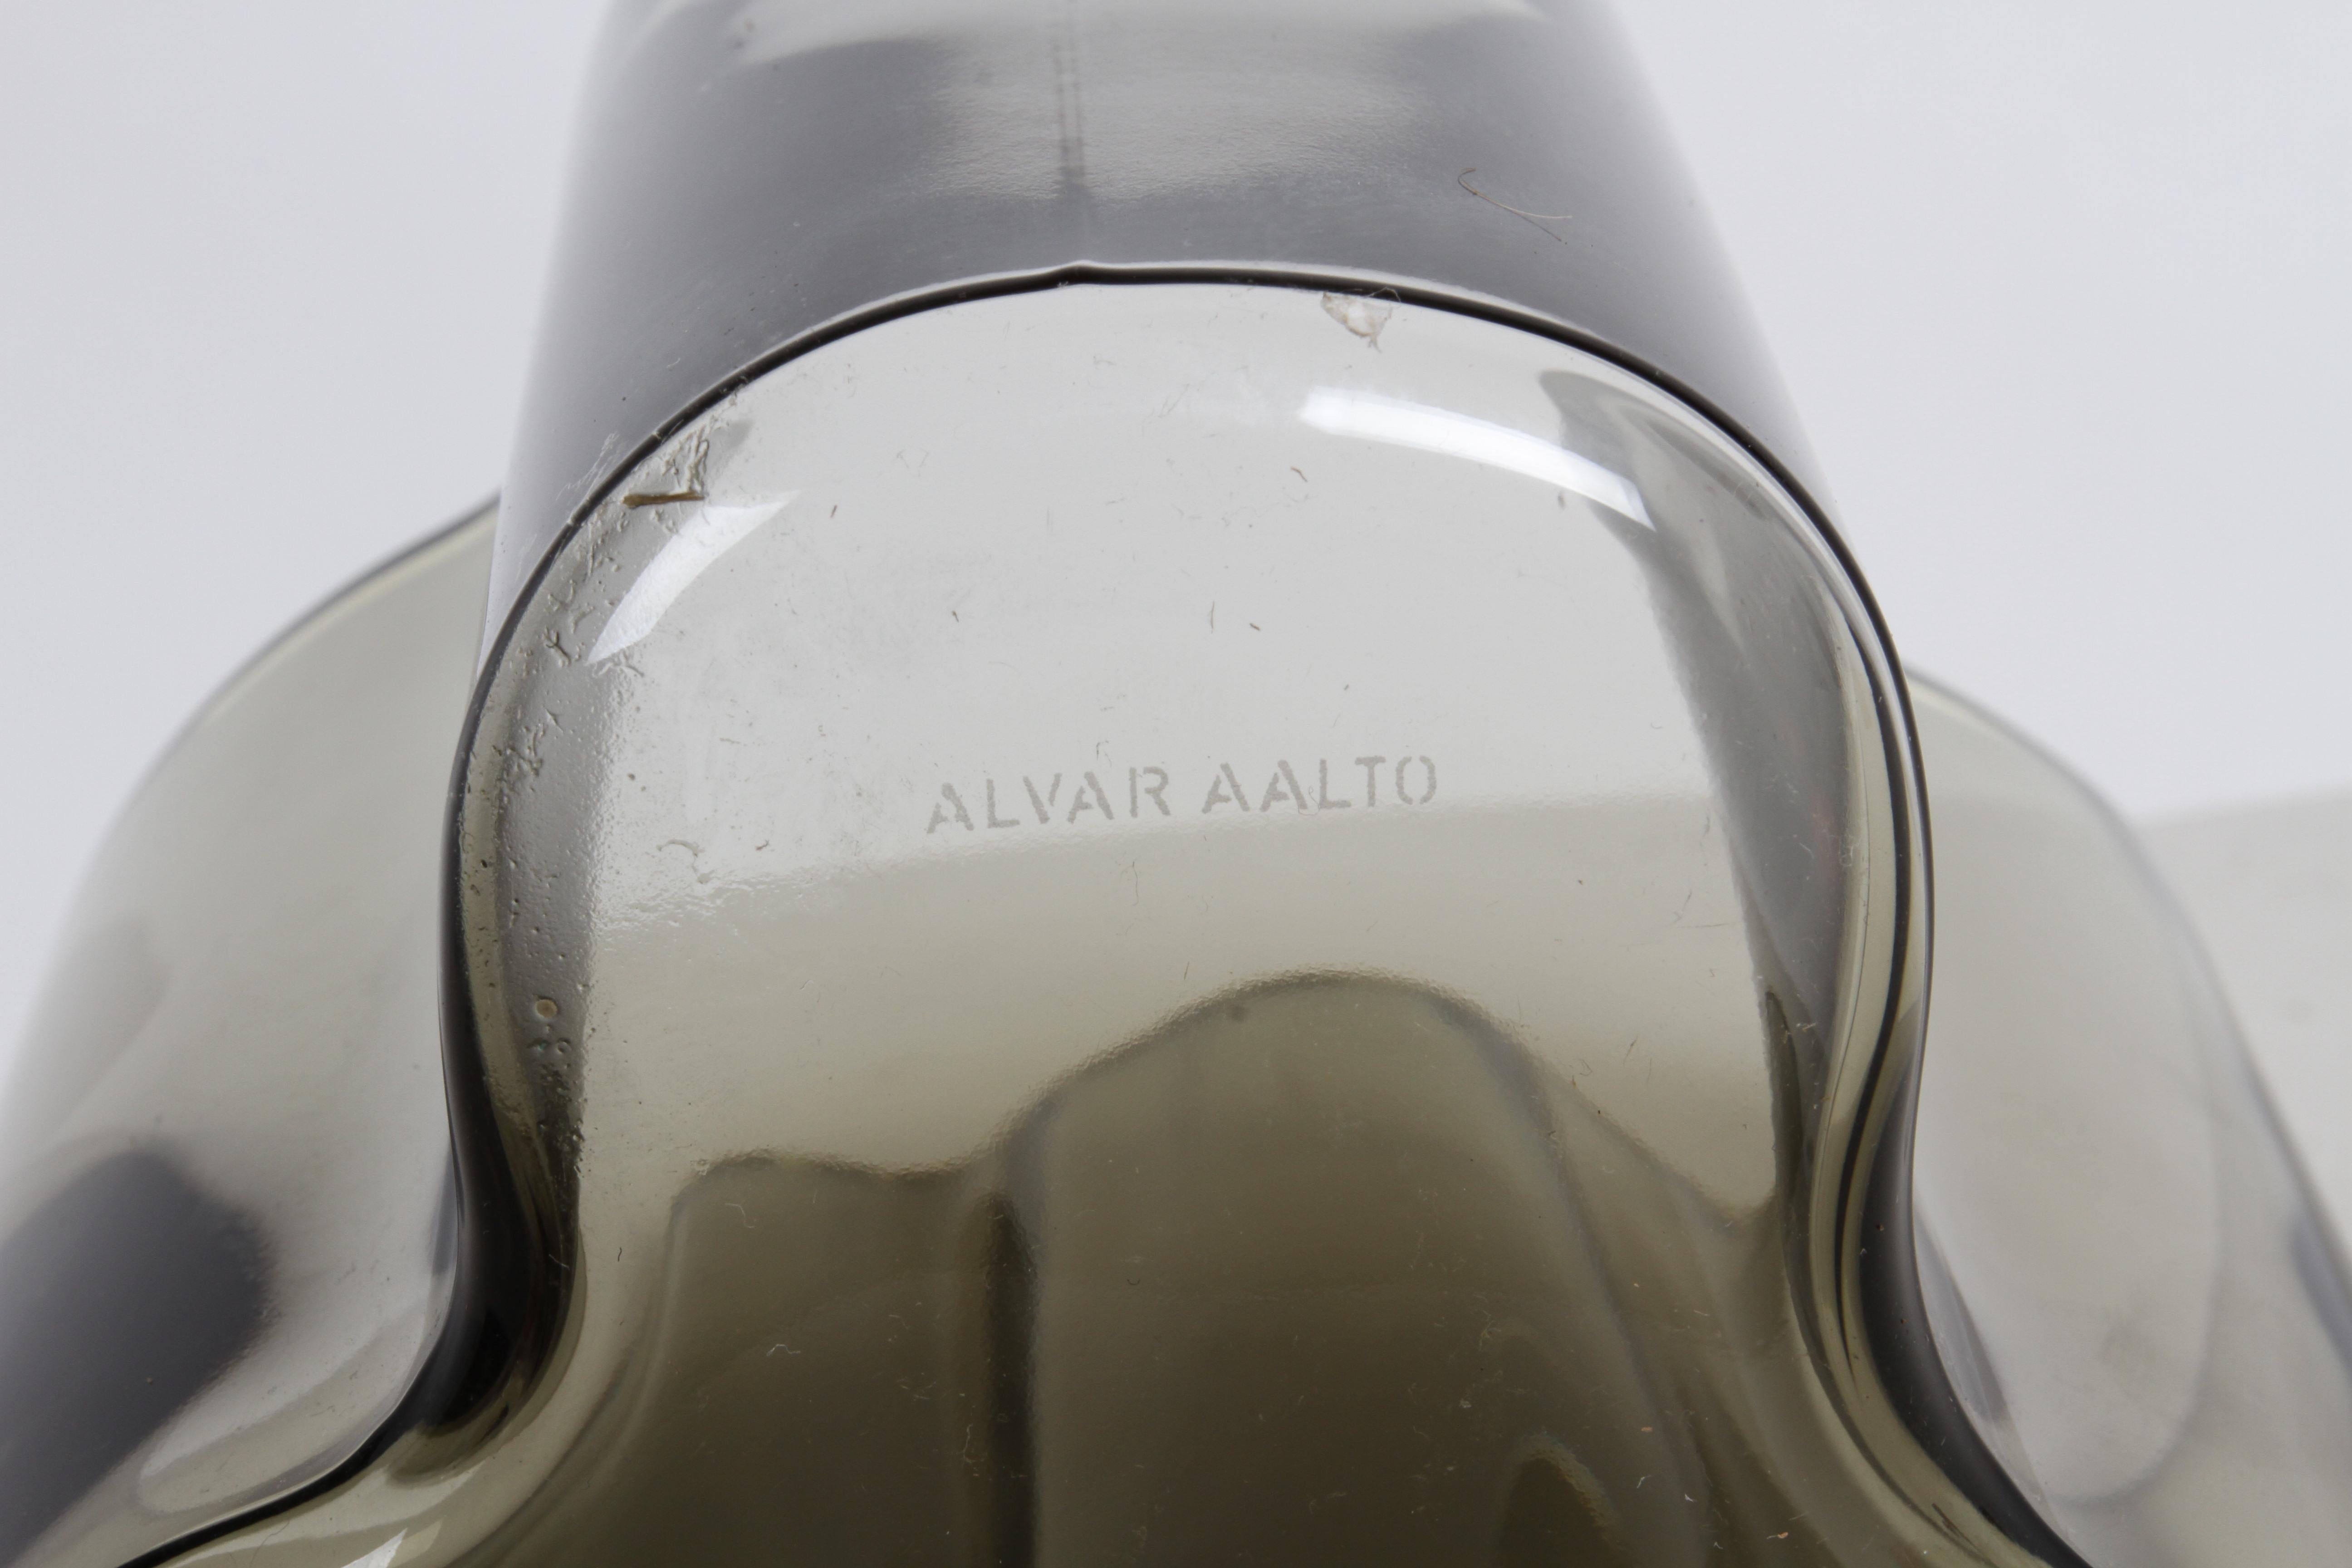 1970s MCM Alvar Aalto Savoy Vase 3030 in Smoke Gray Glass by Iittala Finland For Sale 7